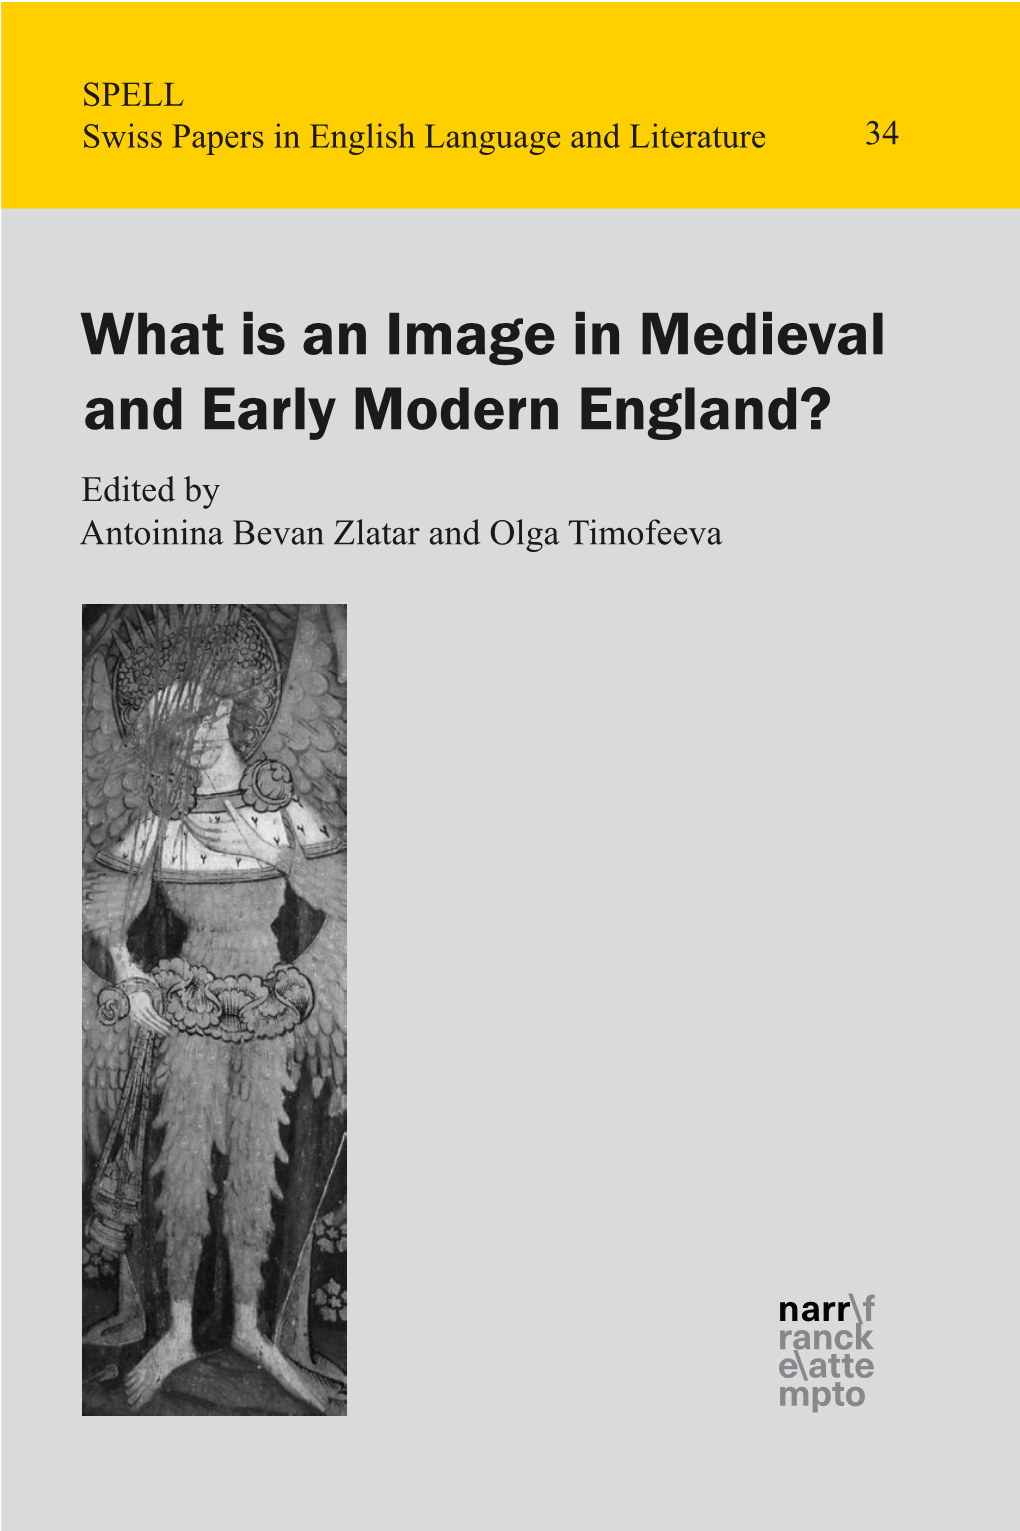 What Is an Image in Medieval and Early Modern England?